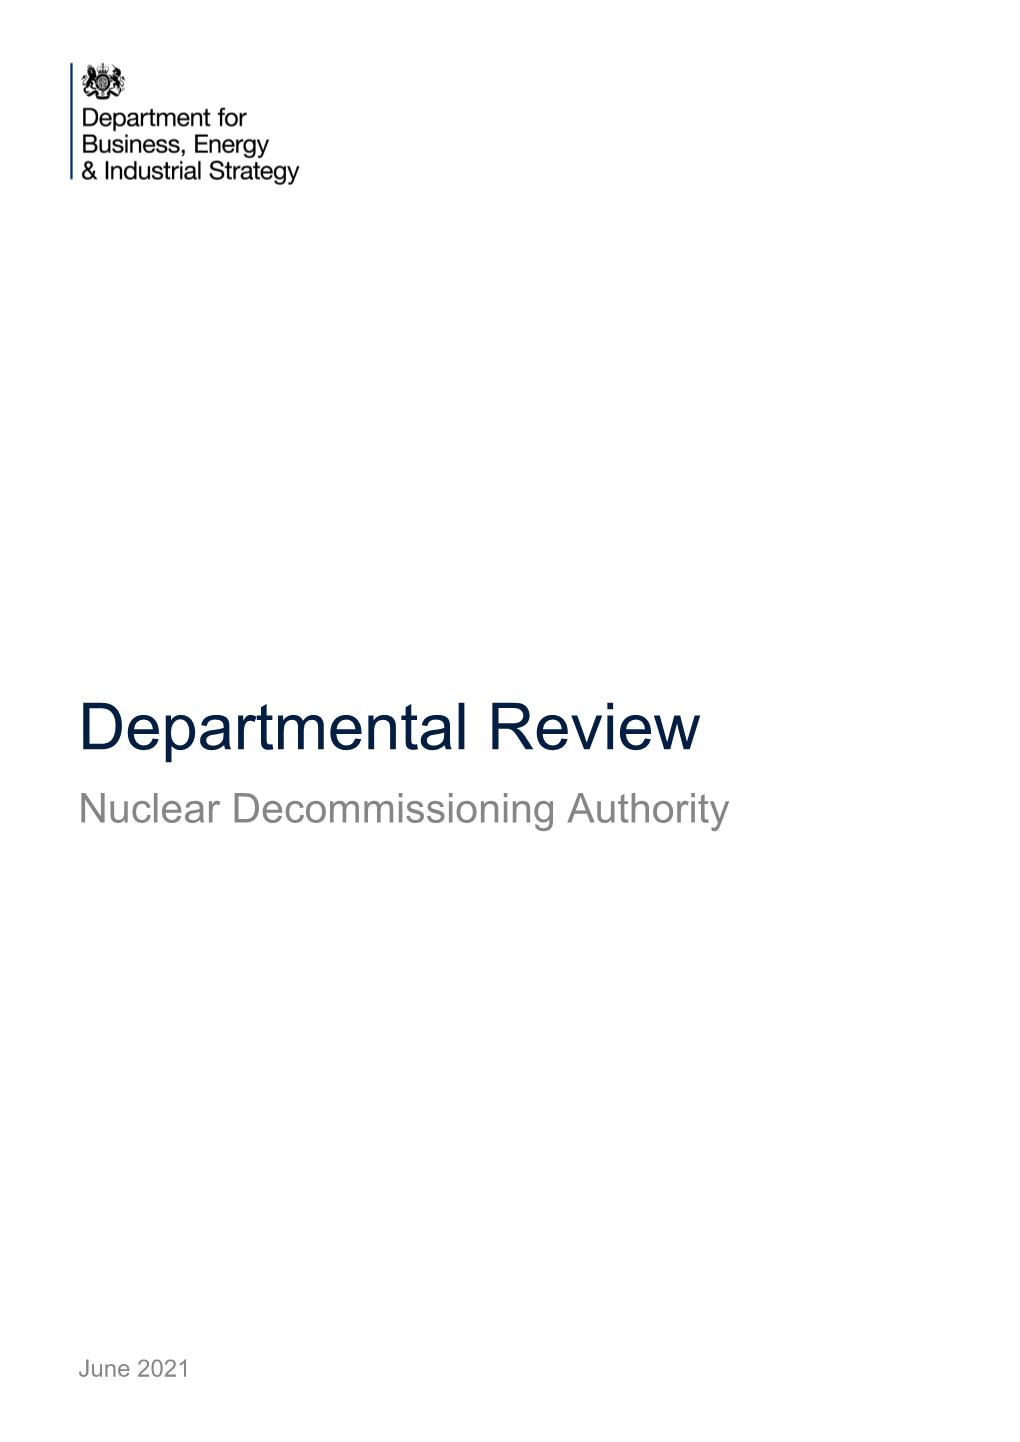 Nuclear Decommissioning Authority: Departmental Review